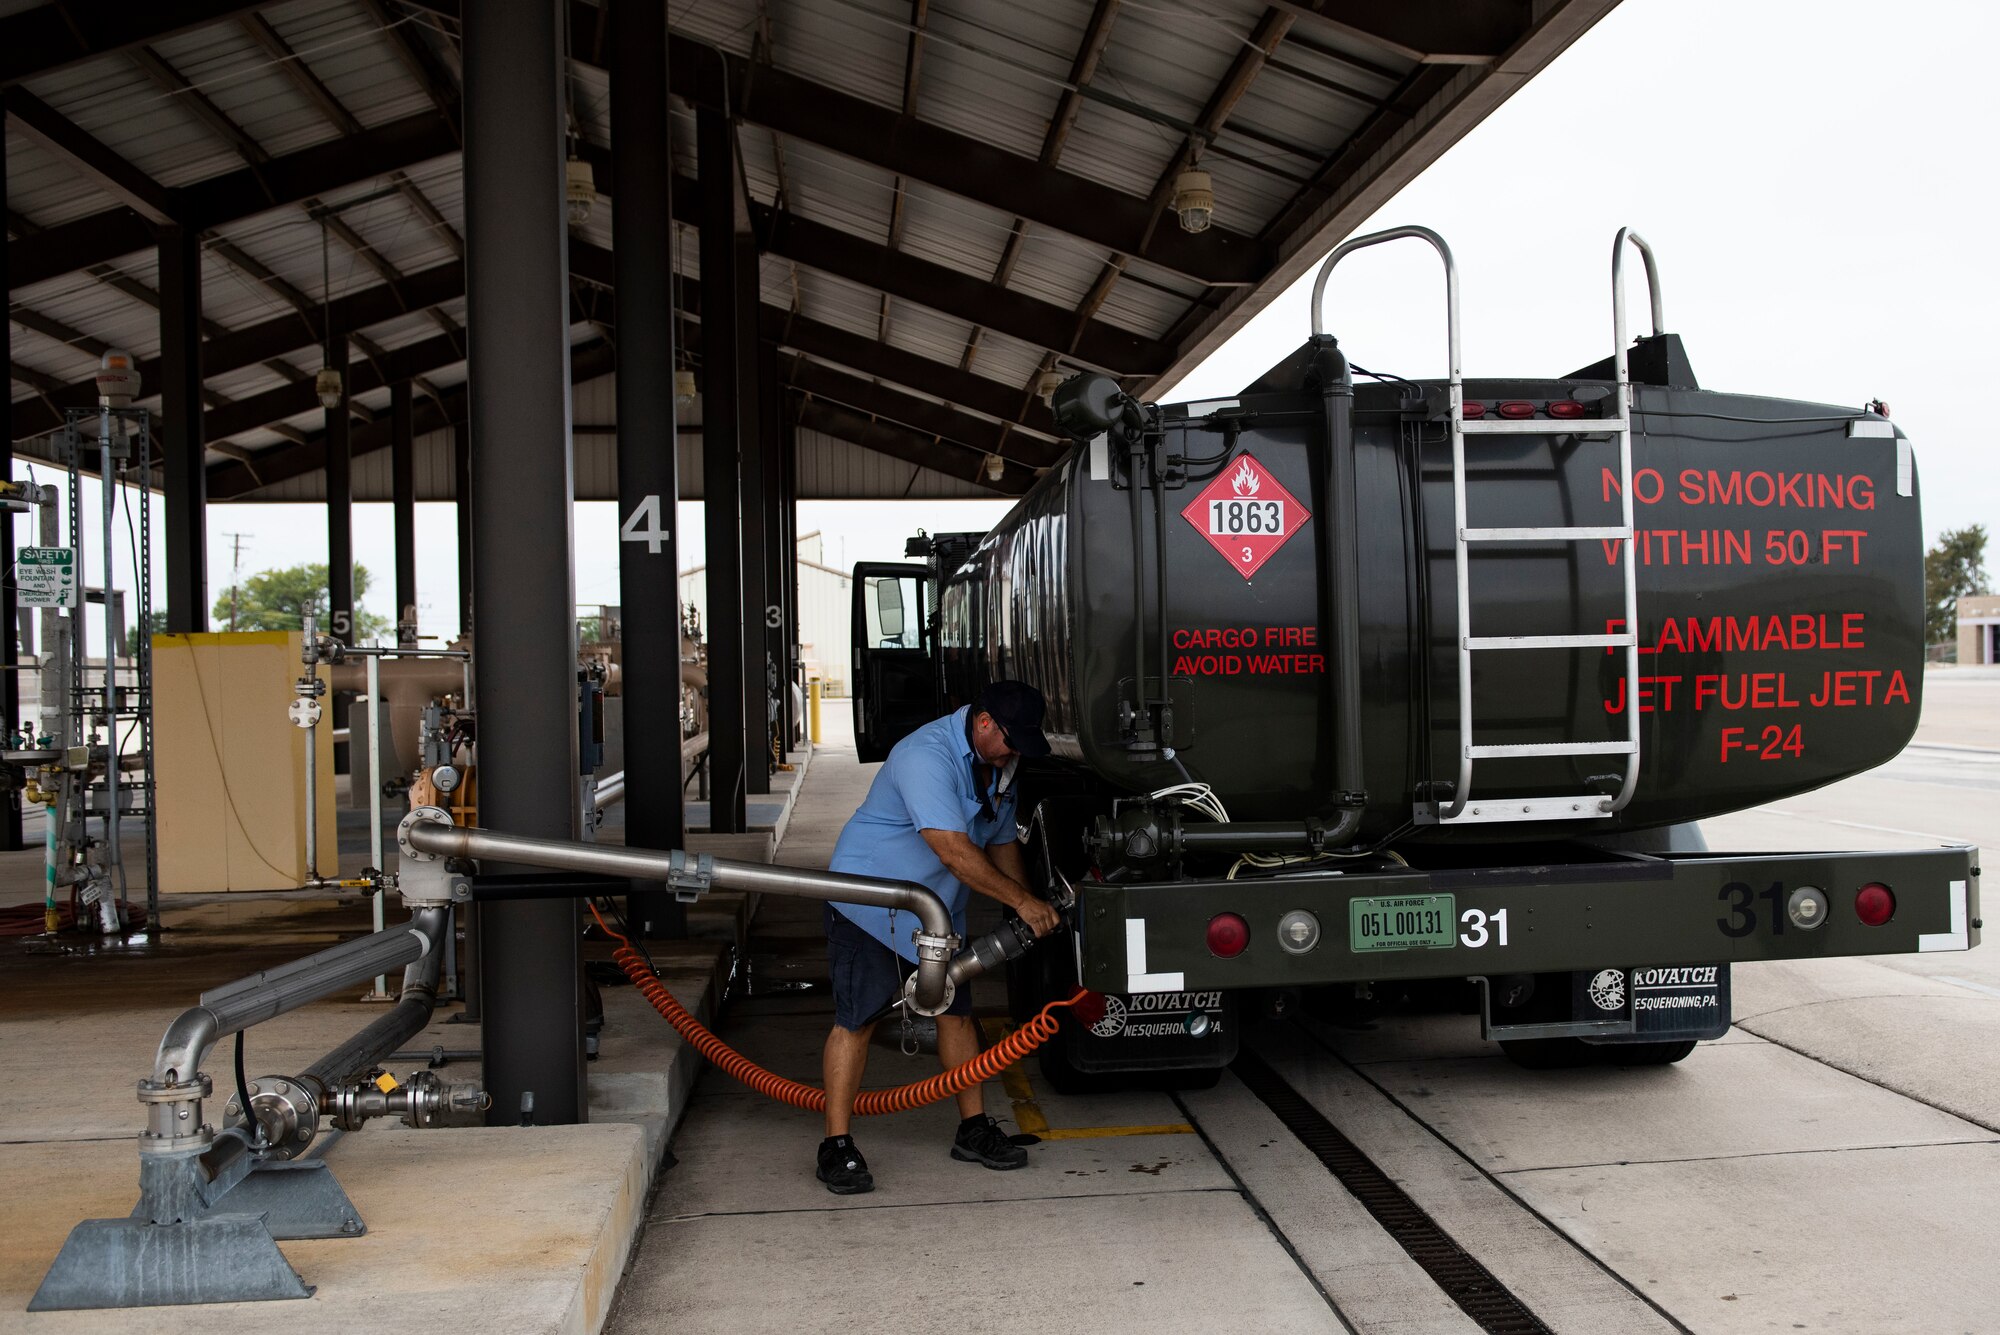 An R-11 refueler truck is fueled before it takes its place out on the flight line on Nov. 9, 2020, Laughlin Air Force Base, Texas. The R-11 can refuel 60 T-6A Texan II before needing to be refueled. (U.S. Air Force photo by Airman 1st Class David Phaff